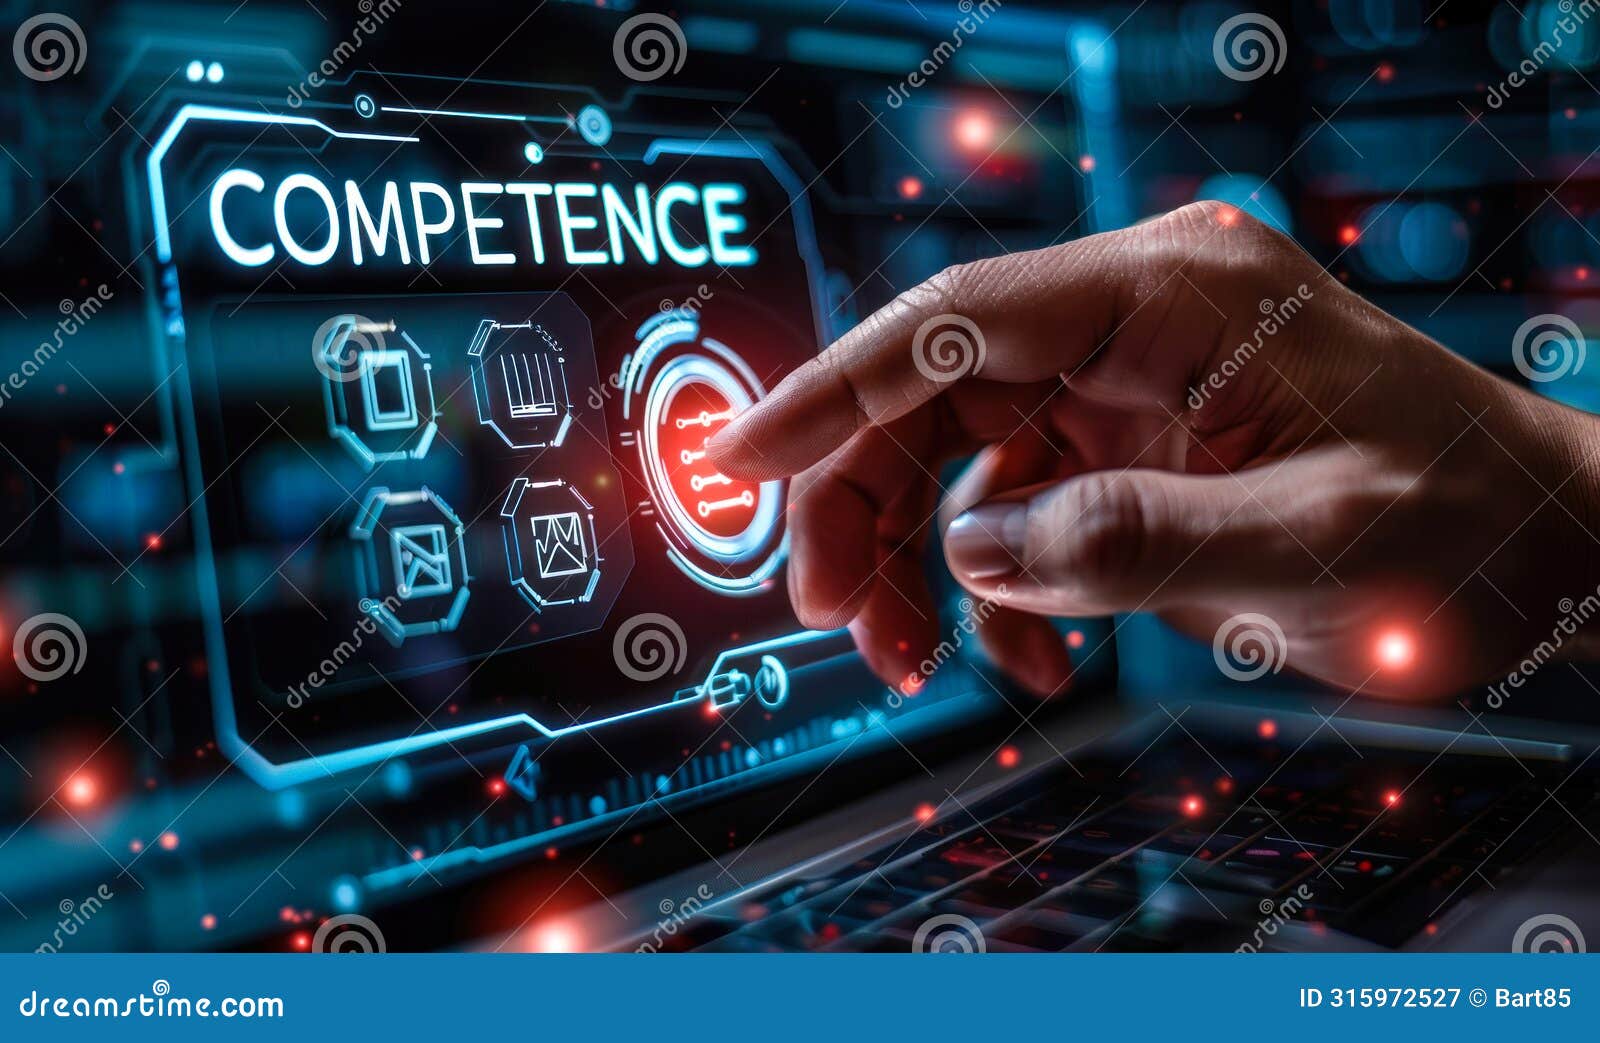 professional is using a laptop to access and enhance core competencies ized by icons representing skills abilities and